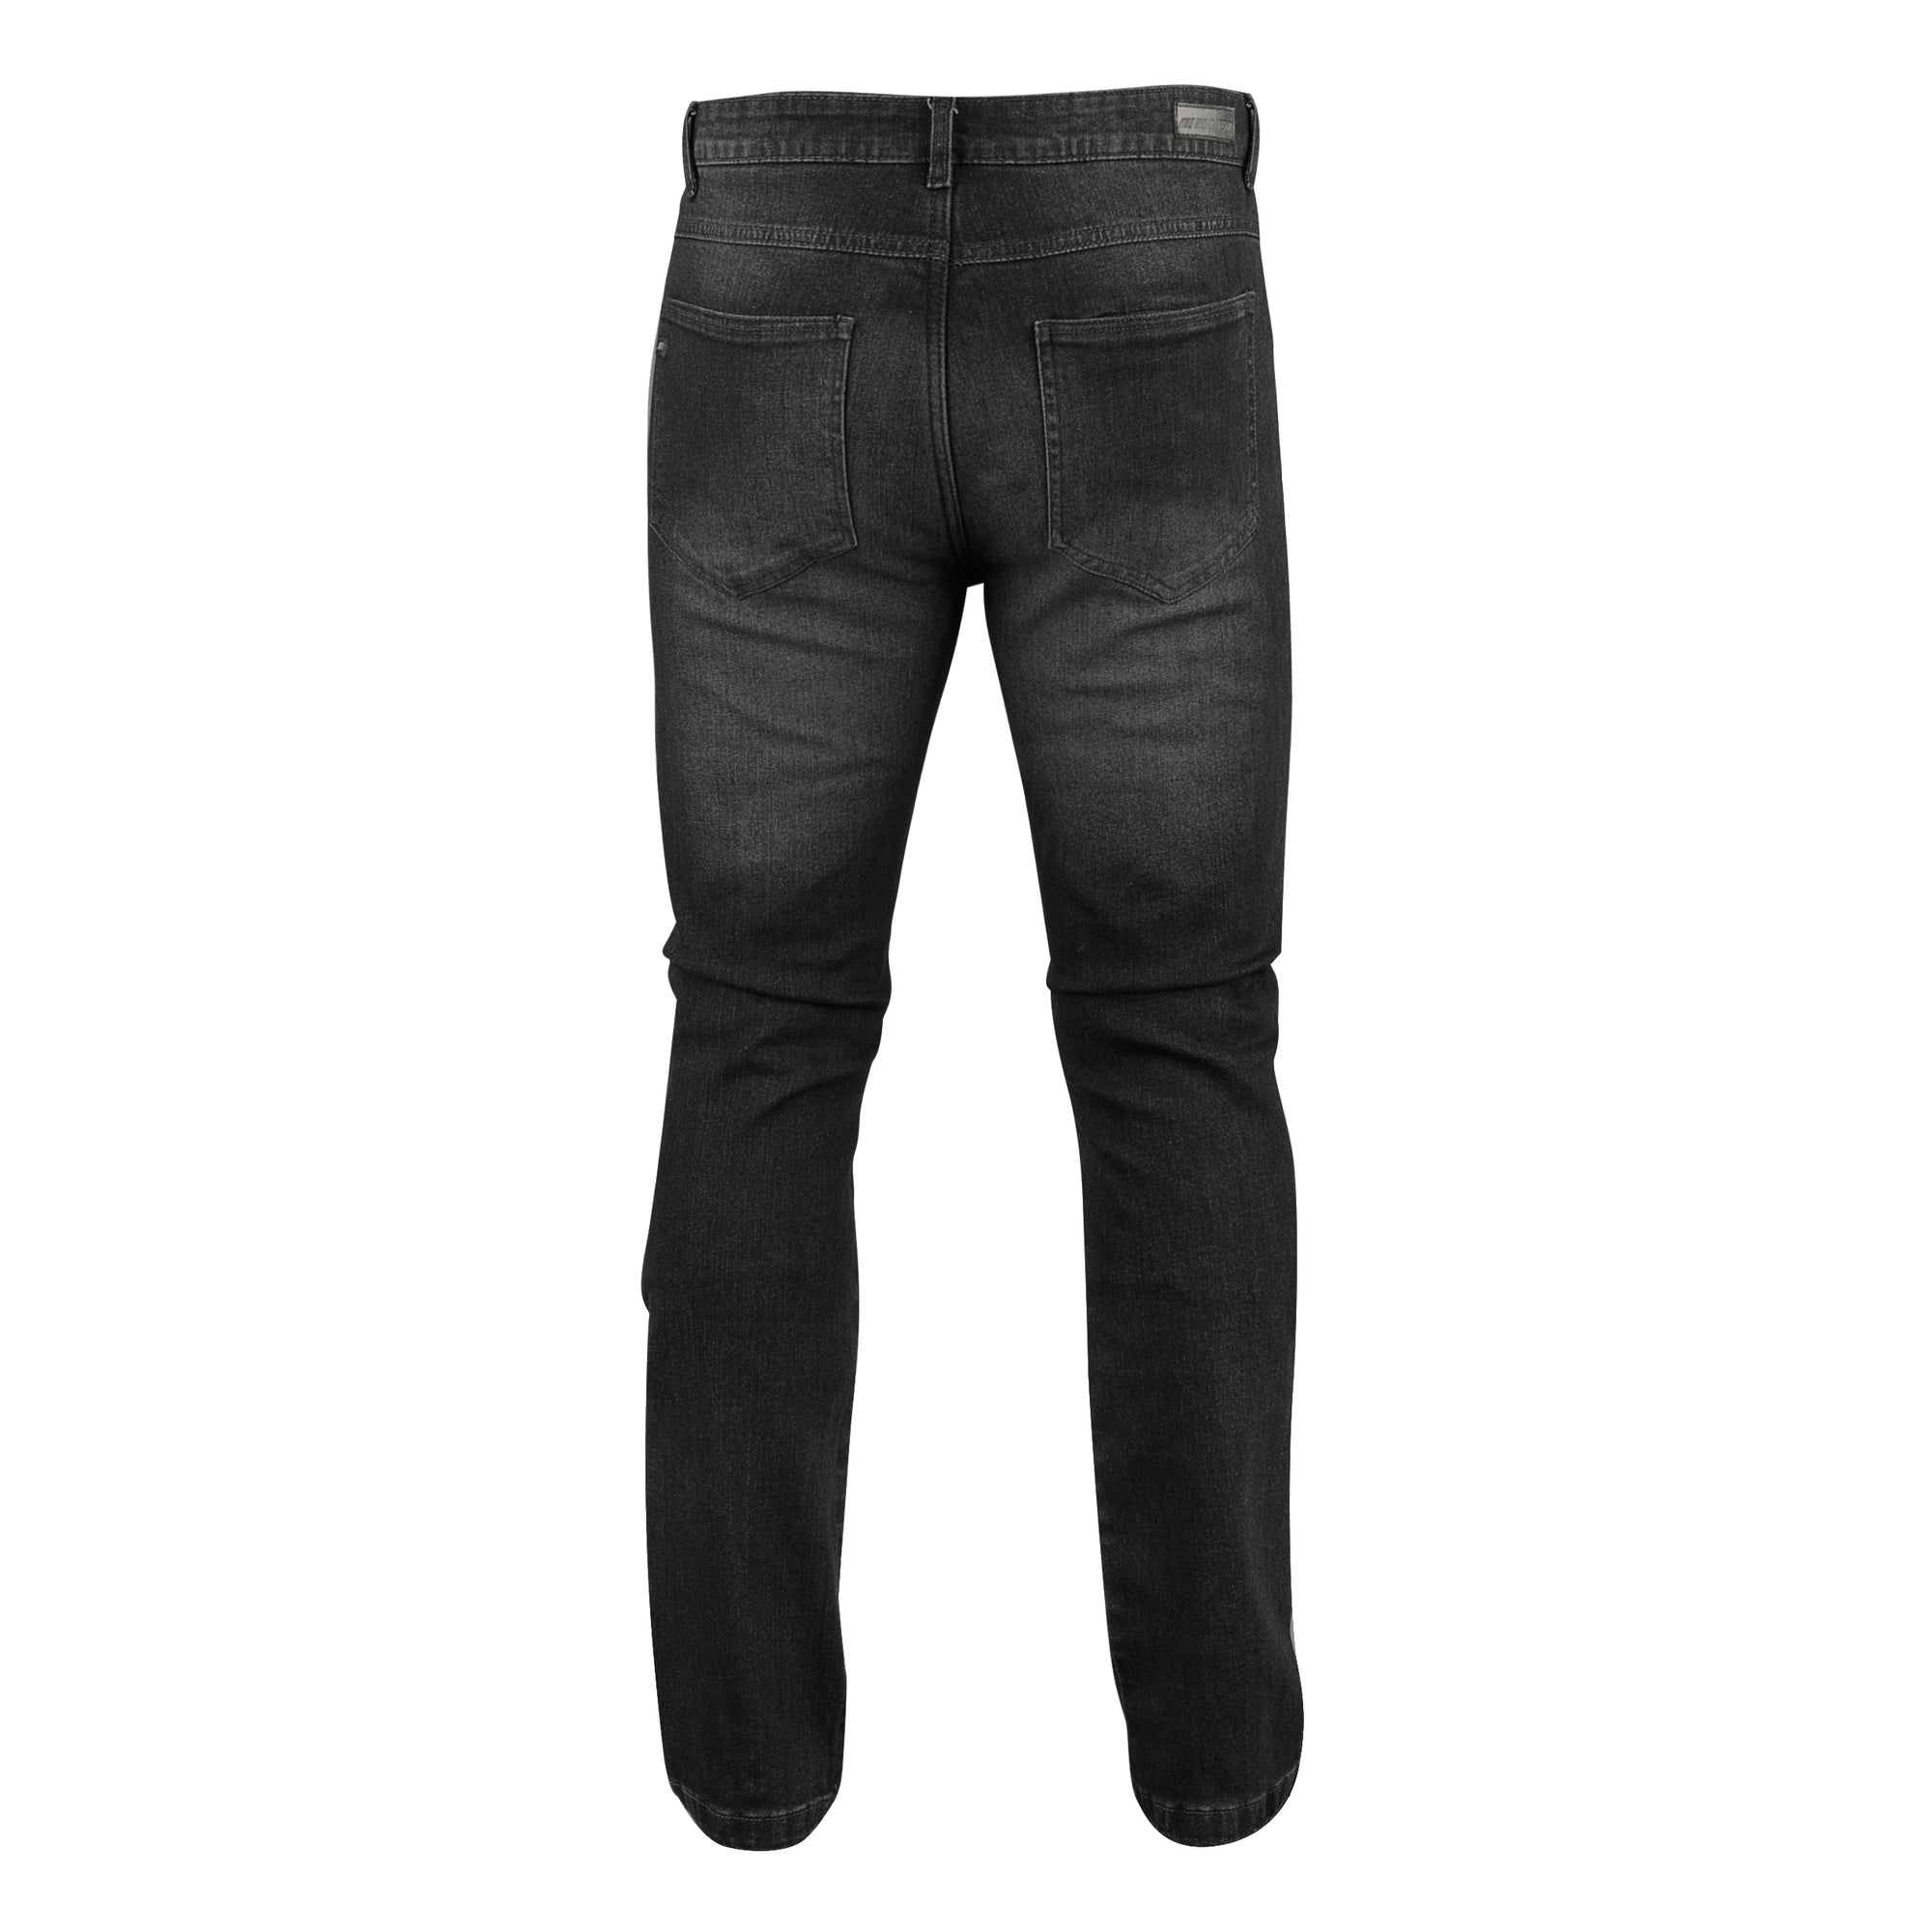 BUY ROCK BIKER Motorcycle Denim Jeans With Knee Protection ON SALE NOW! -  Rugged Motorbike Jeans